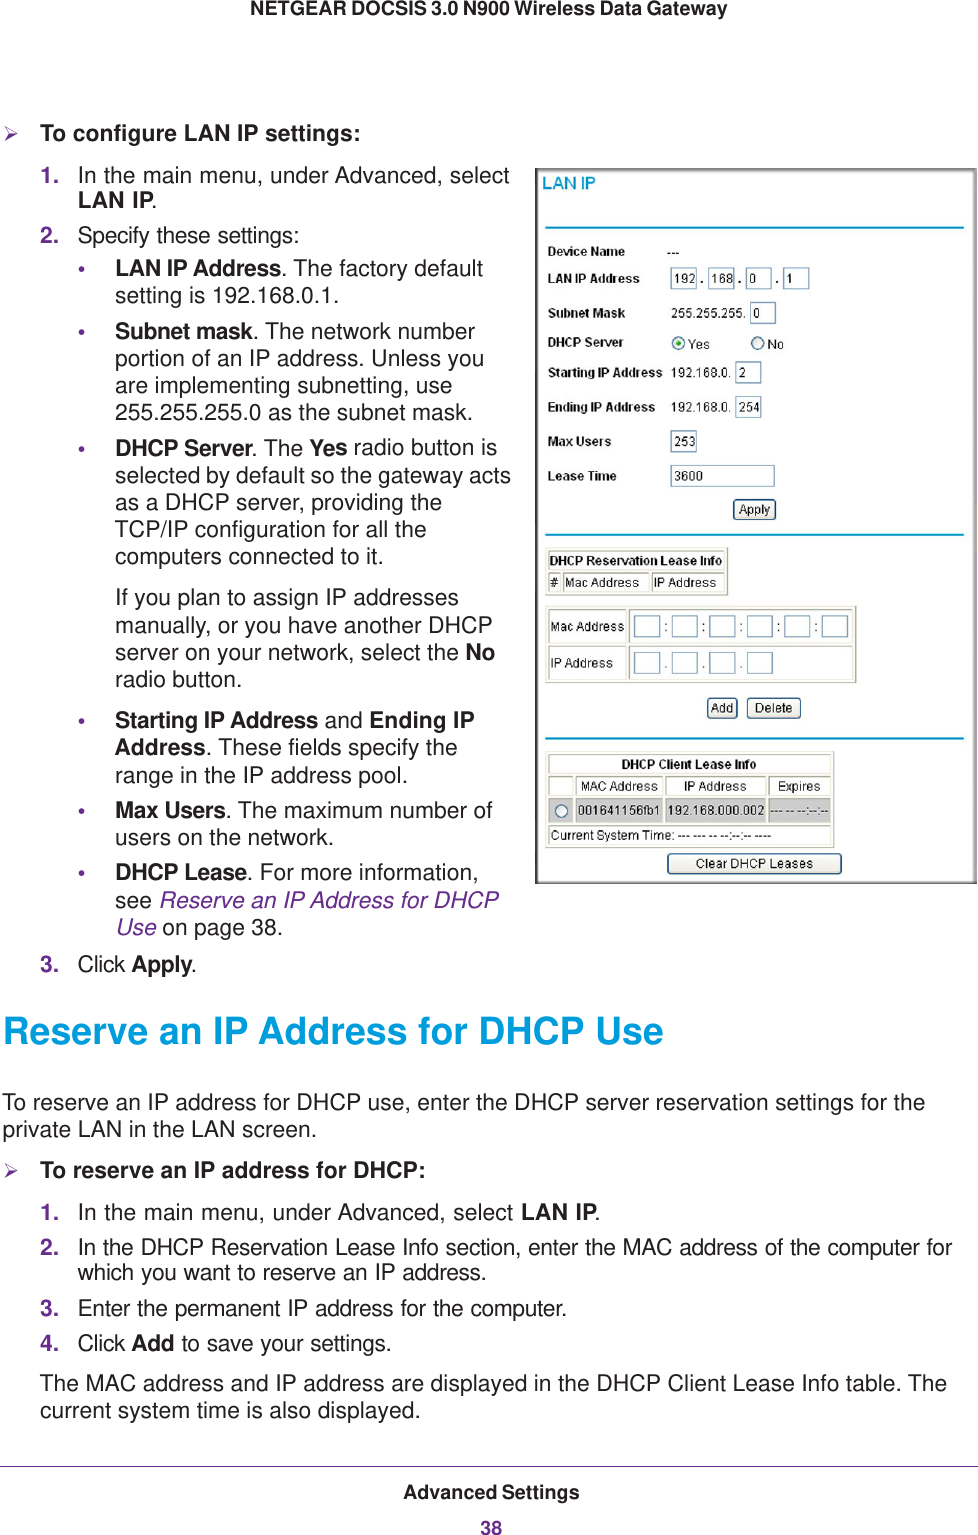 Advanced Settings38NETGEAR DOCSIS 3.0 N900 Wireless Data Gateway To configure LAN IP settings:1. In the main menu, under Advanced, select LAN IP. 2. Specify these settings:•LAN IP Address. The factory default setting is 192.168.0.1.•Subnet mask. The network number portion of an IP address. Unless you are implementing subnetting, use 255.255.255.0 as the subnet mask.•DHCP Server. The Yes radio button is selected by default so the gateway acts as a DHCP server, providing the TCP/IP configuration for all the computers connected to it. If you plan to assign IP addresses manually, or you have another DHCP server on your network, select the No radio button.•Starting IP Address and Ending IP Address. These fields specify the range in the IP address pool. •Max Users. The maximum number of users on the network.•DHCP Lease. For more information, see Reserve an IP Address for DHCP Use on page  38.3. Click Apply.Reserve an IP Address for DHCP UseTo reserve an IP address for DHCP use, enter the DHCP server reservation settings for the private LAN in the LAN screen.To reserve an IP address for DHCP:1. In the main menu, under Advanced, select LAN IP.2. In the DHCP Reservation Lease Info section, enter the MAC address of the computer for which you want to reserve an IP address.3. Enter the permanent IP address for the computer.4. Click Add to save your settings.The MAC address and IP address are displayed in the DHCP Client Lease Info table. The current system time is also displayed.